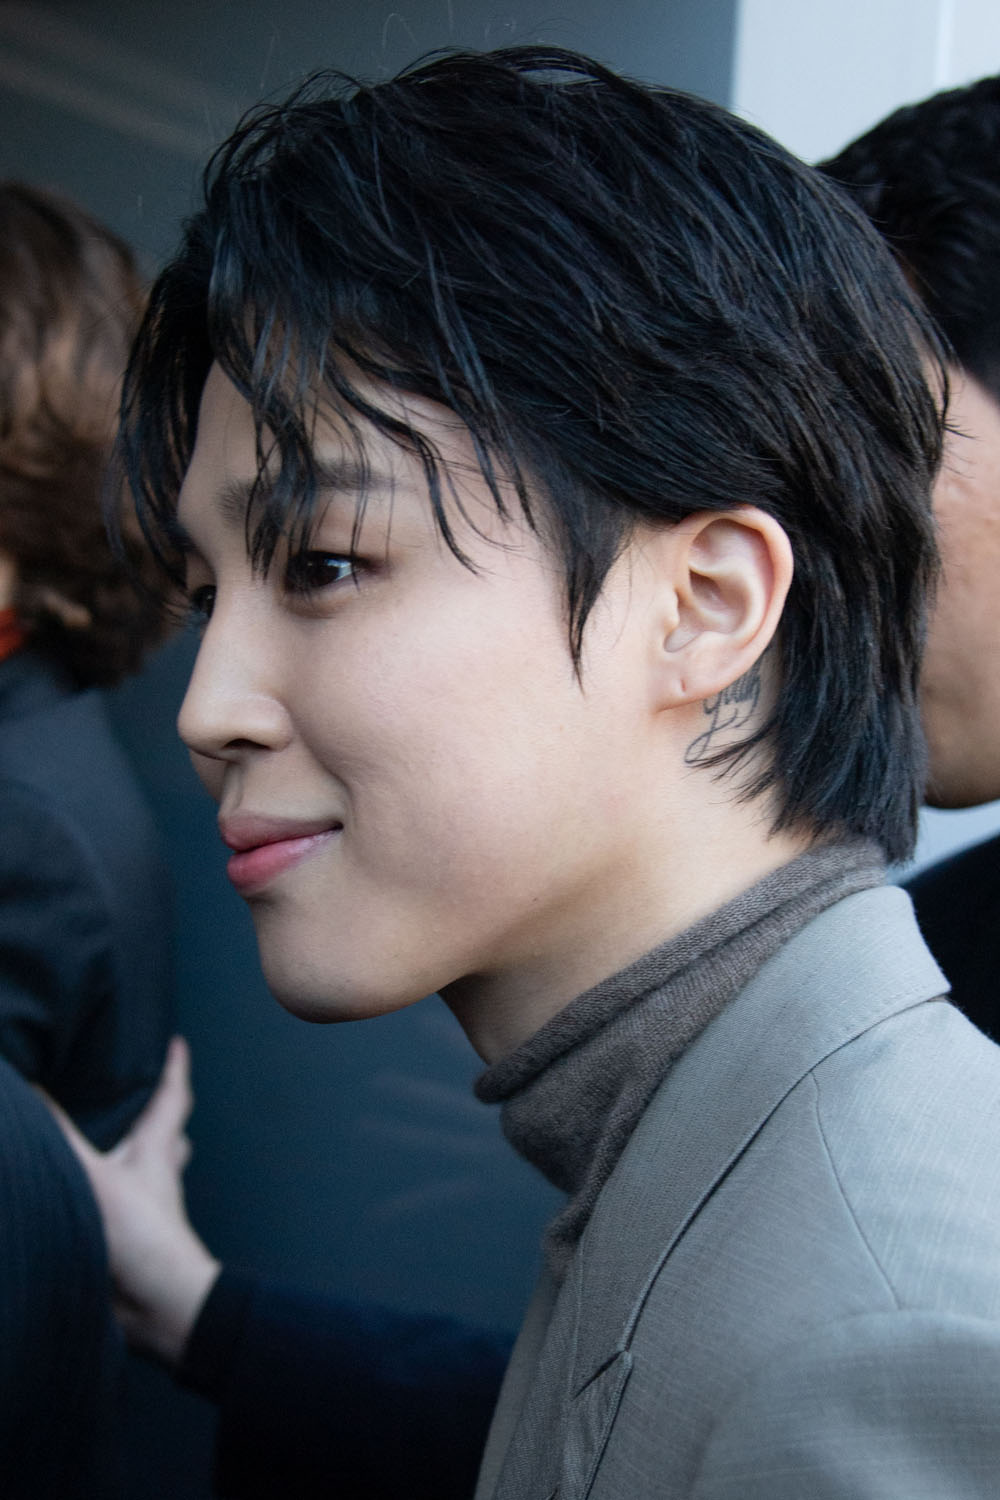 BTS star Jimin attends the Dior Homme Menswear Fall-Winter fashion show  with bandmate J-Hope